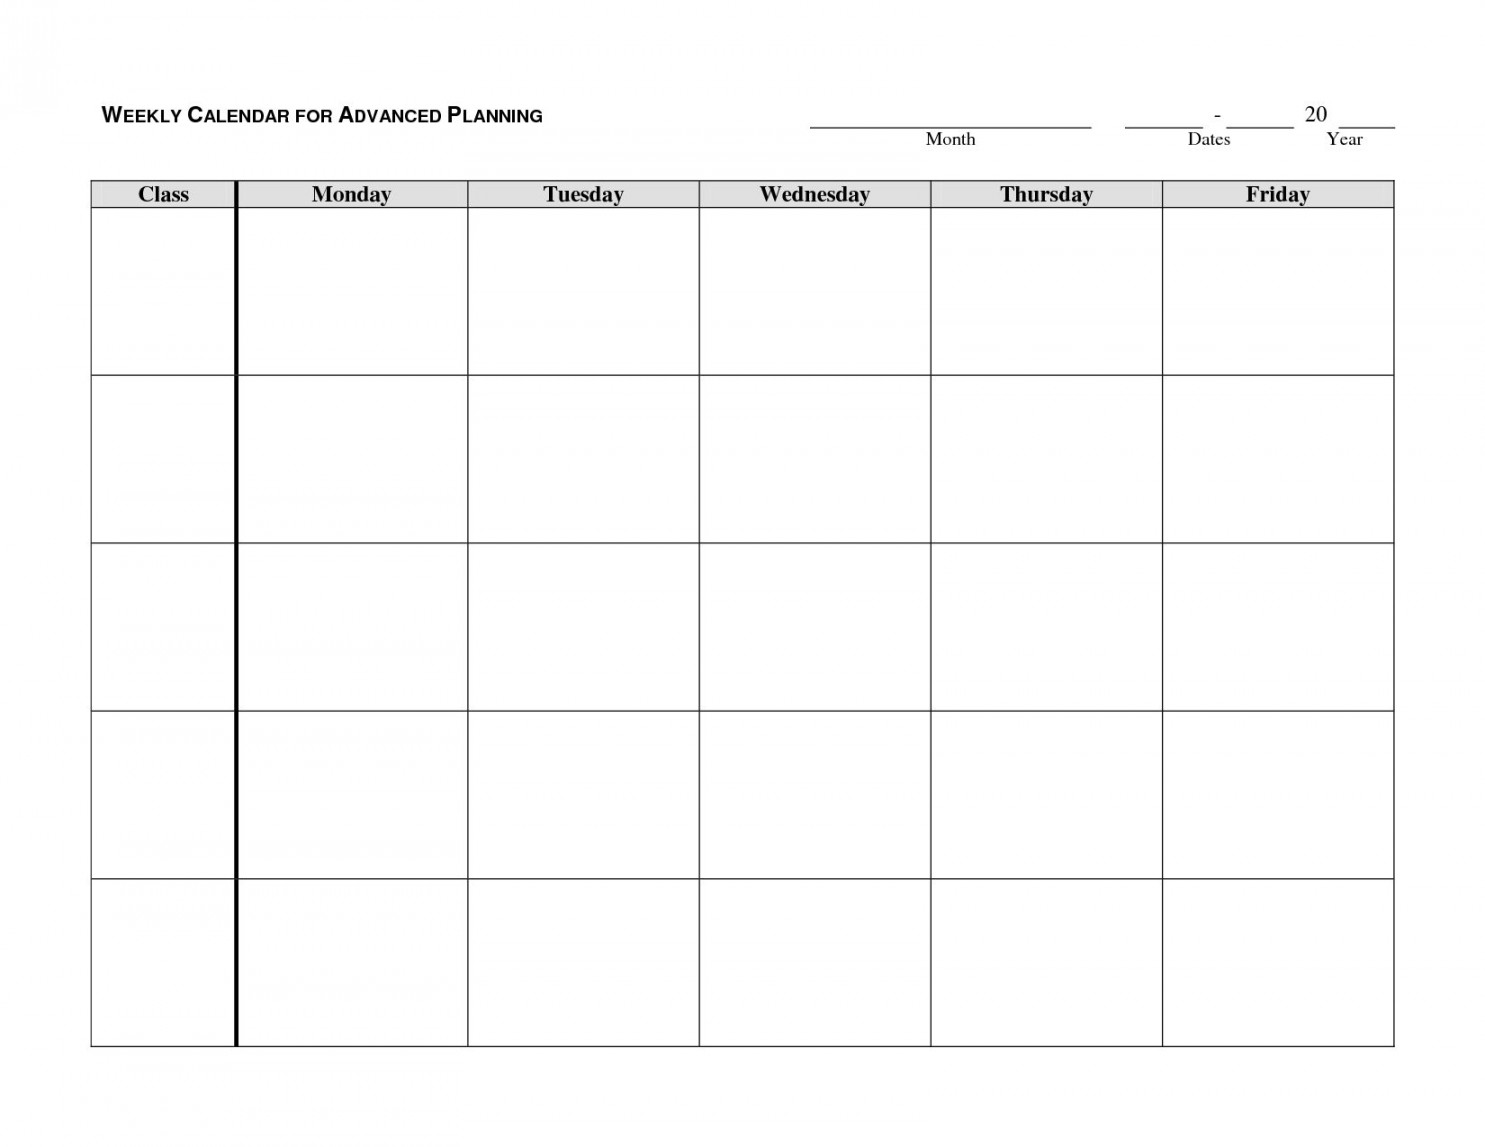 Monday Through Friday Blank Schedule Print Out  Weekly calendar